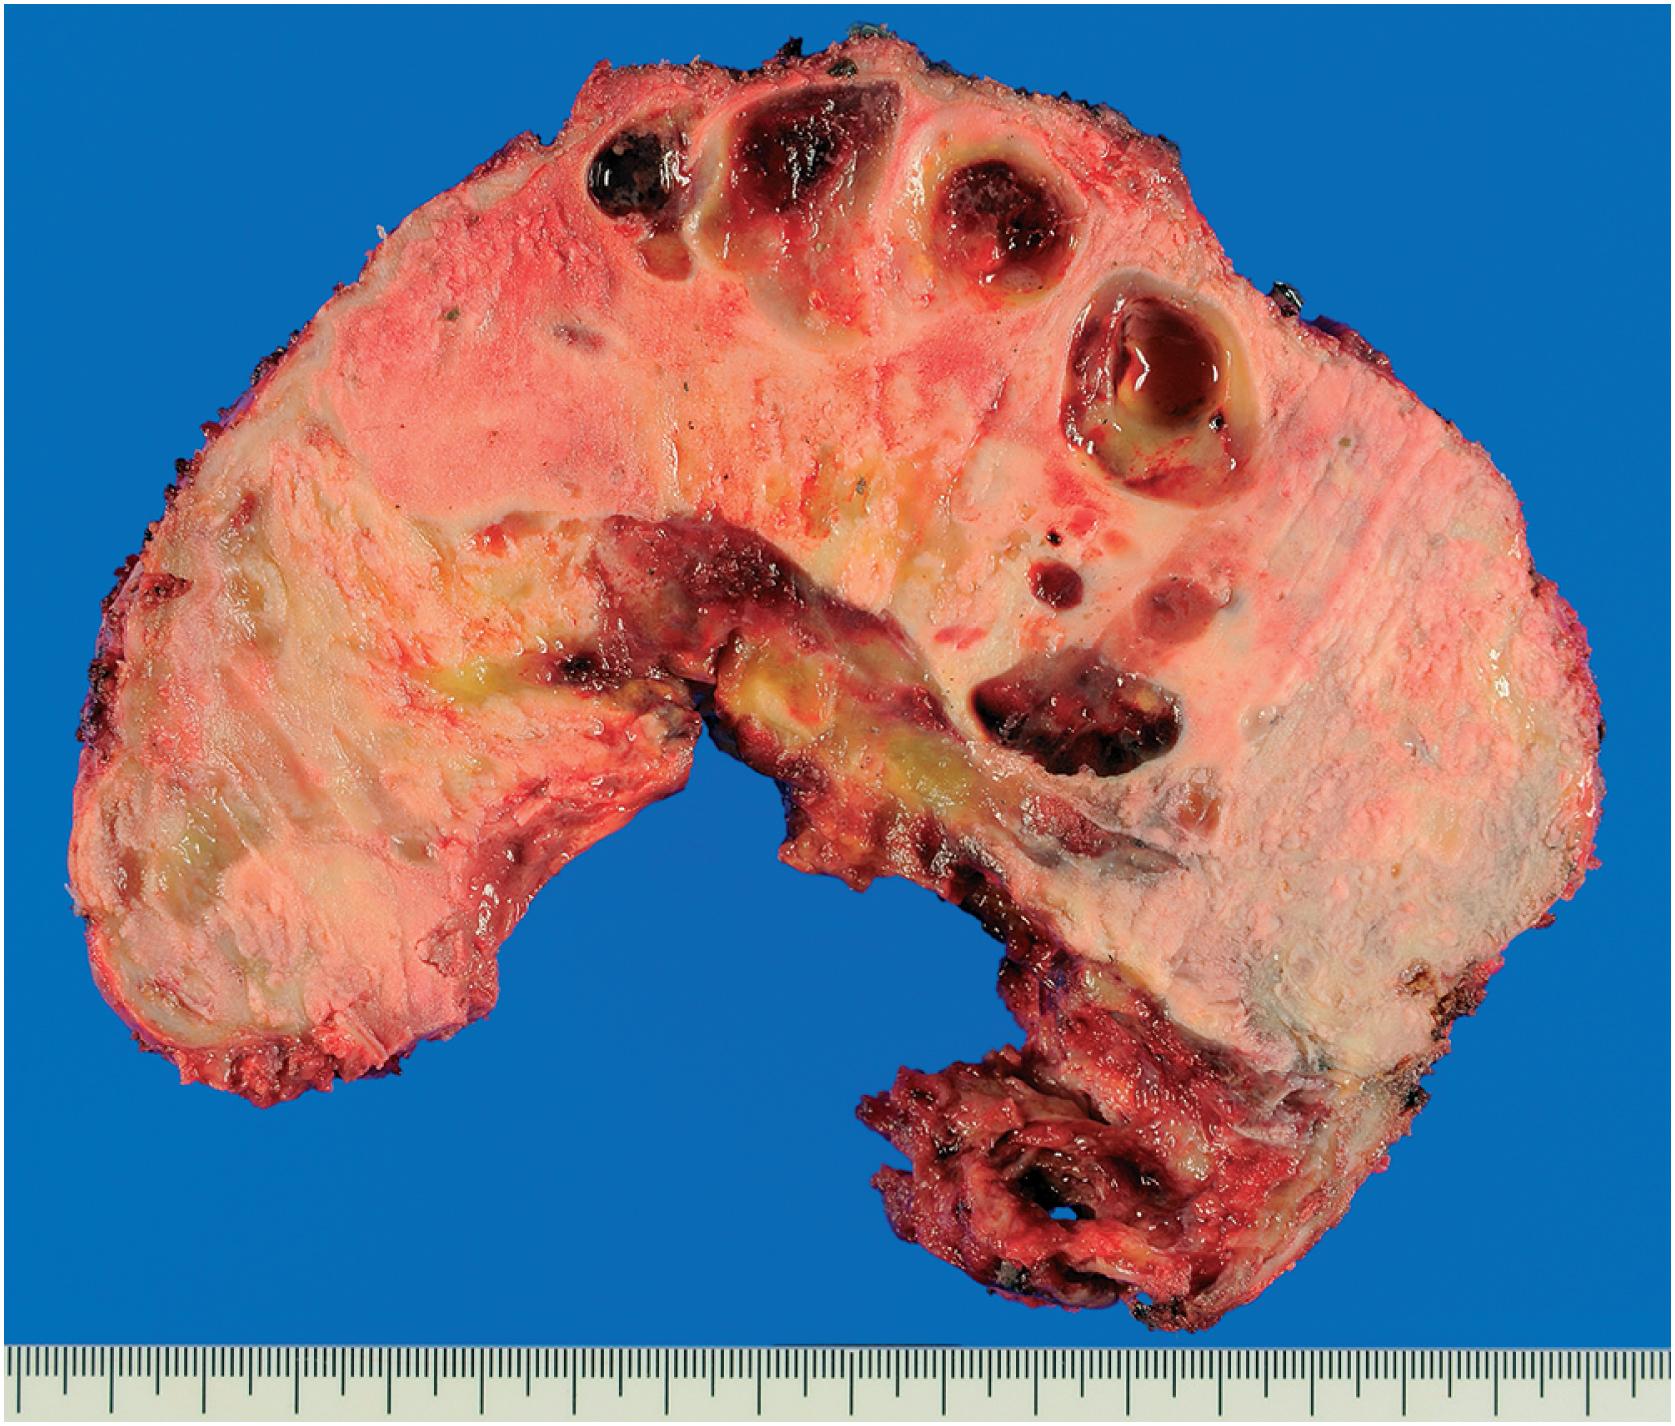 Fig. 20.4, A pelvic bone resected after denosumab therapy showing a white calcified tumor with cystic changes.